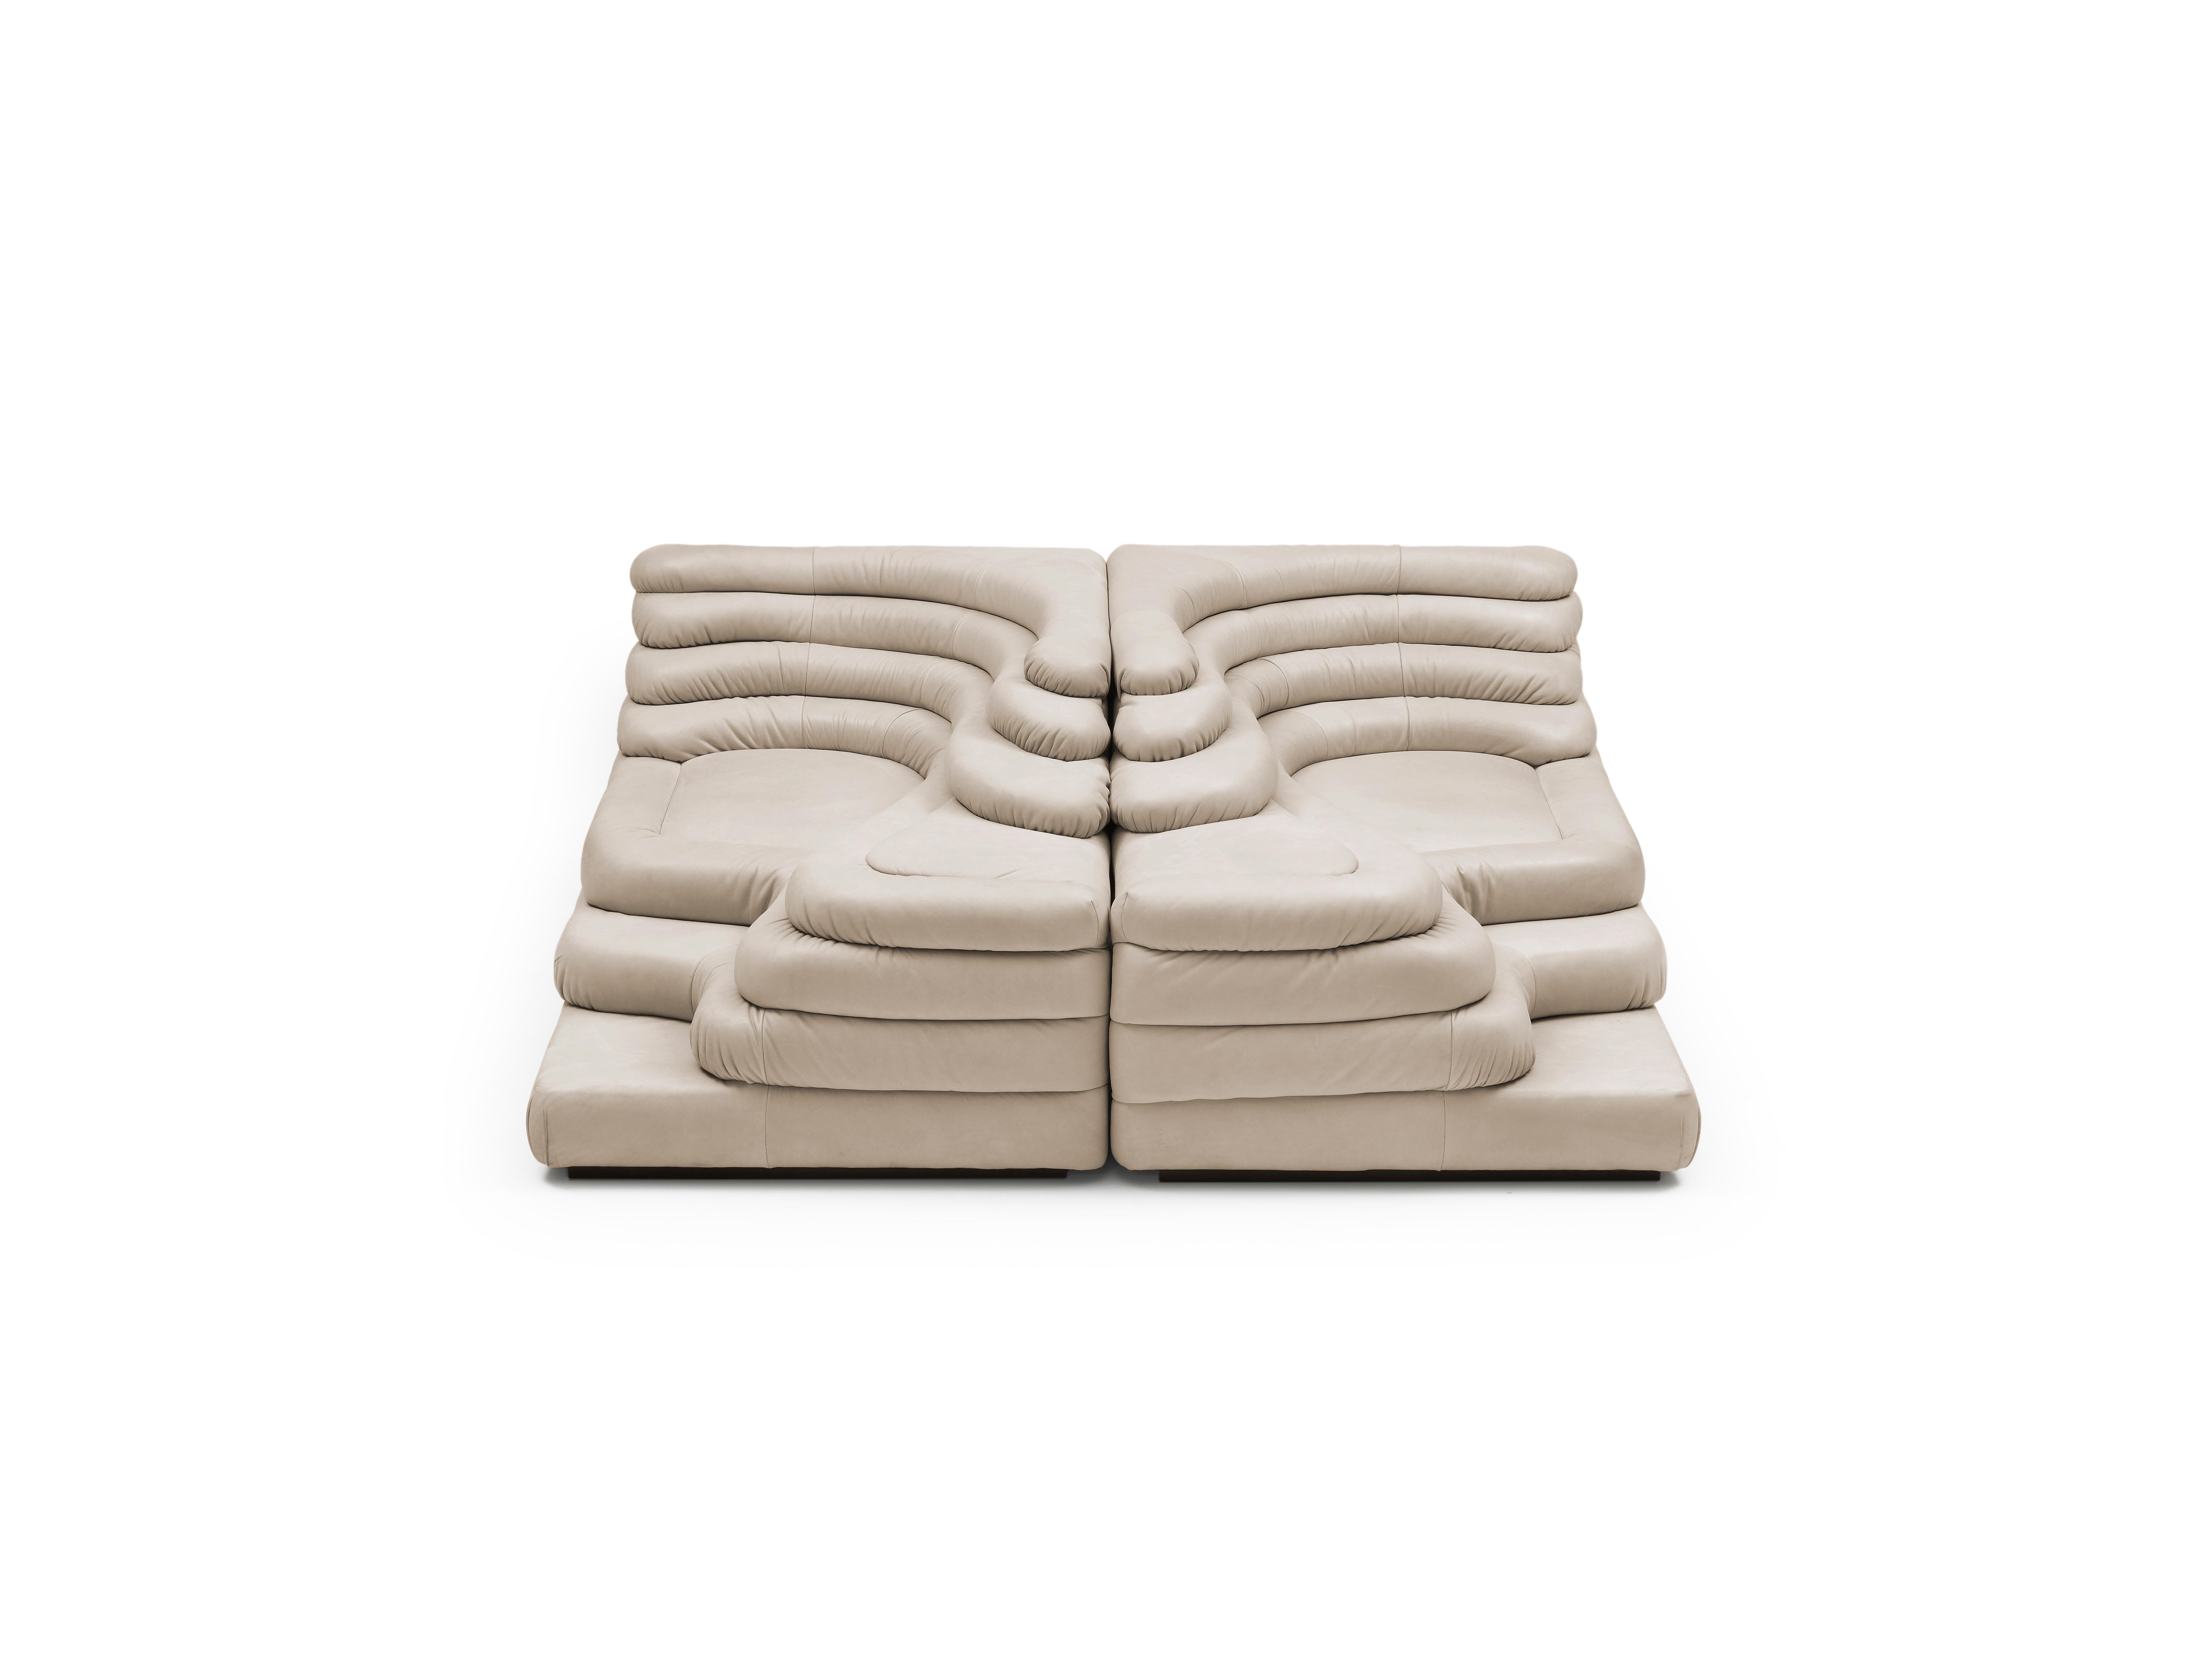 DS-1025 set of sofas by De Sede
Design: Ubald Klug
Dimensions: Left: D 91 x W 156 x H 70 cm, right D 91 x W 156 x H 38 cm
Materials: SEDEX upholstery with wadding cushion. Stable, compact frame made of beech and board material.

Prices may